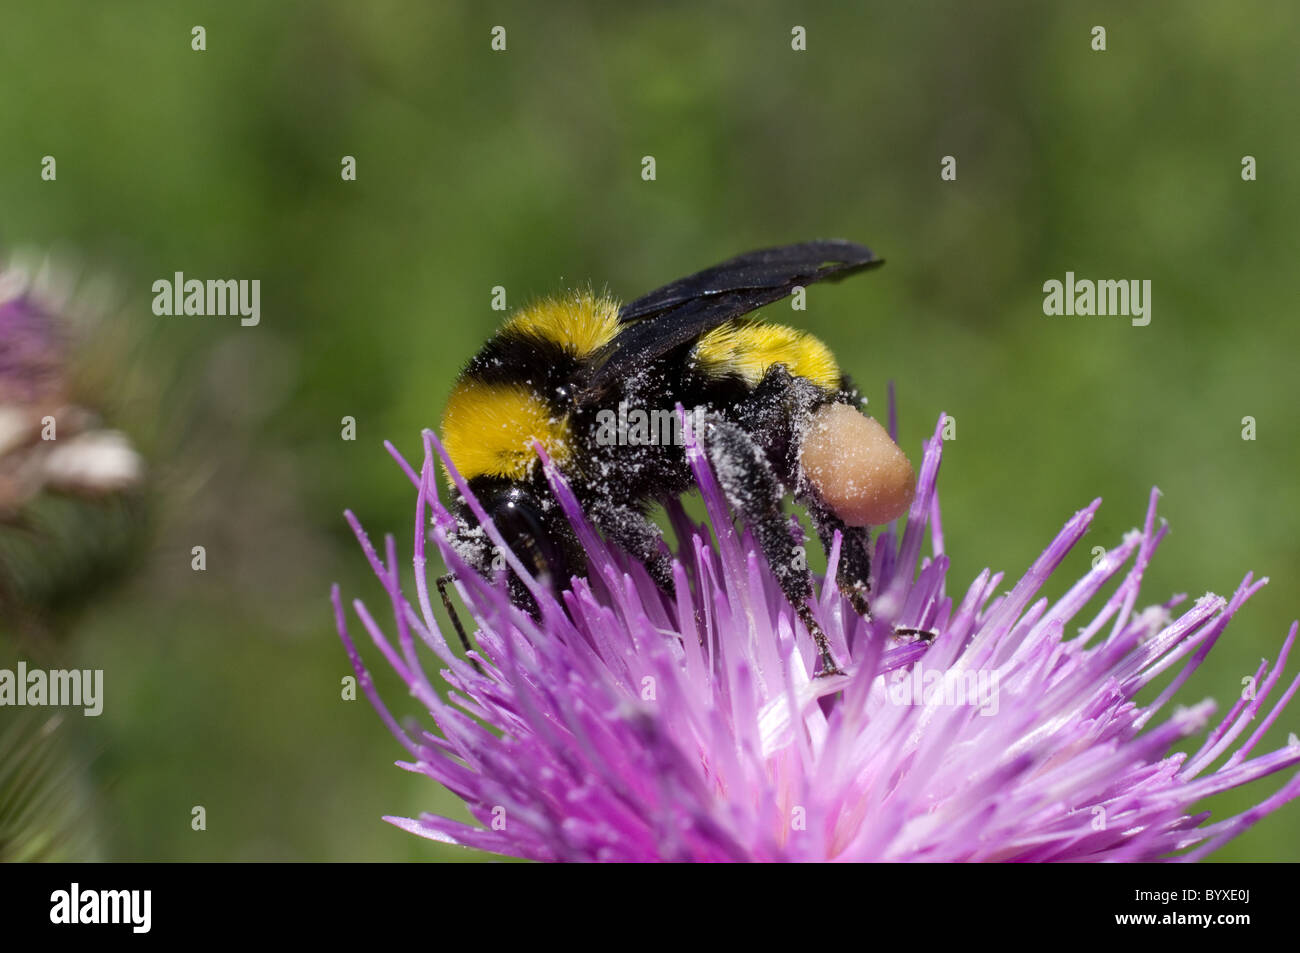 Bumble bee (Bombus sp) with a big corbicula (pollen basket) over a Plume thistle (Cirsium sp) flower in Mexico Stock Photo